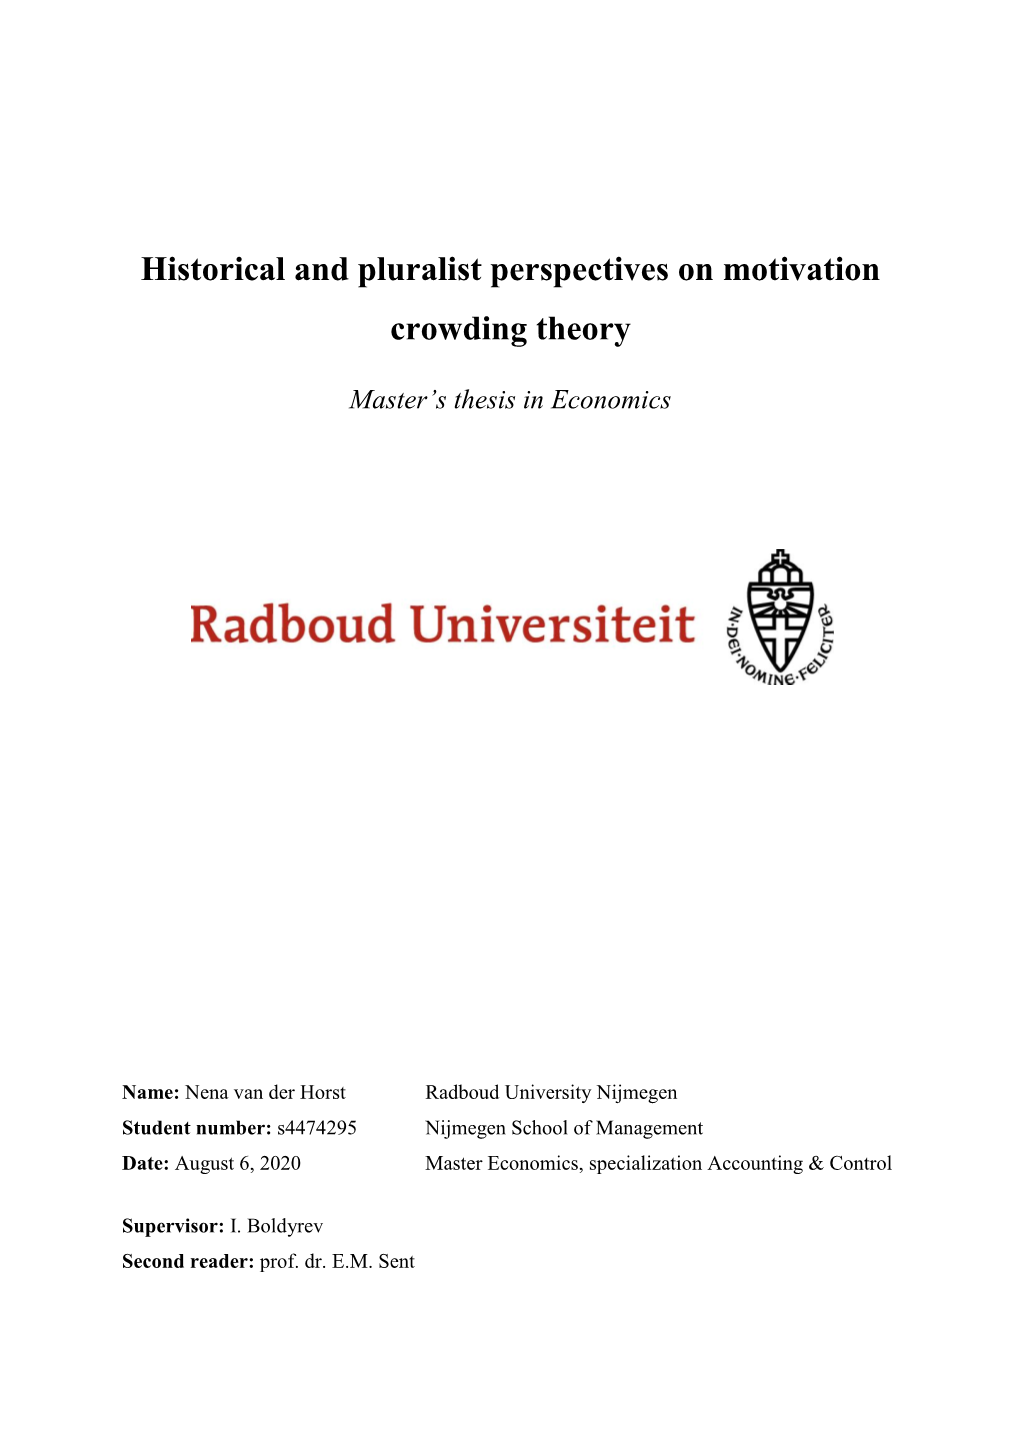 Historical and Pluralist Perspectives on Motivation Crowding Theory